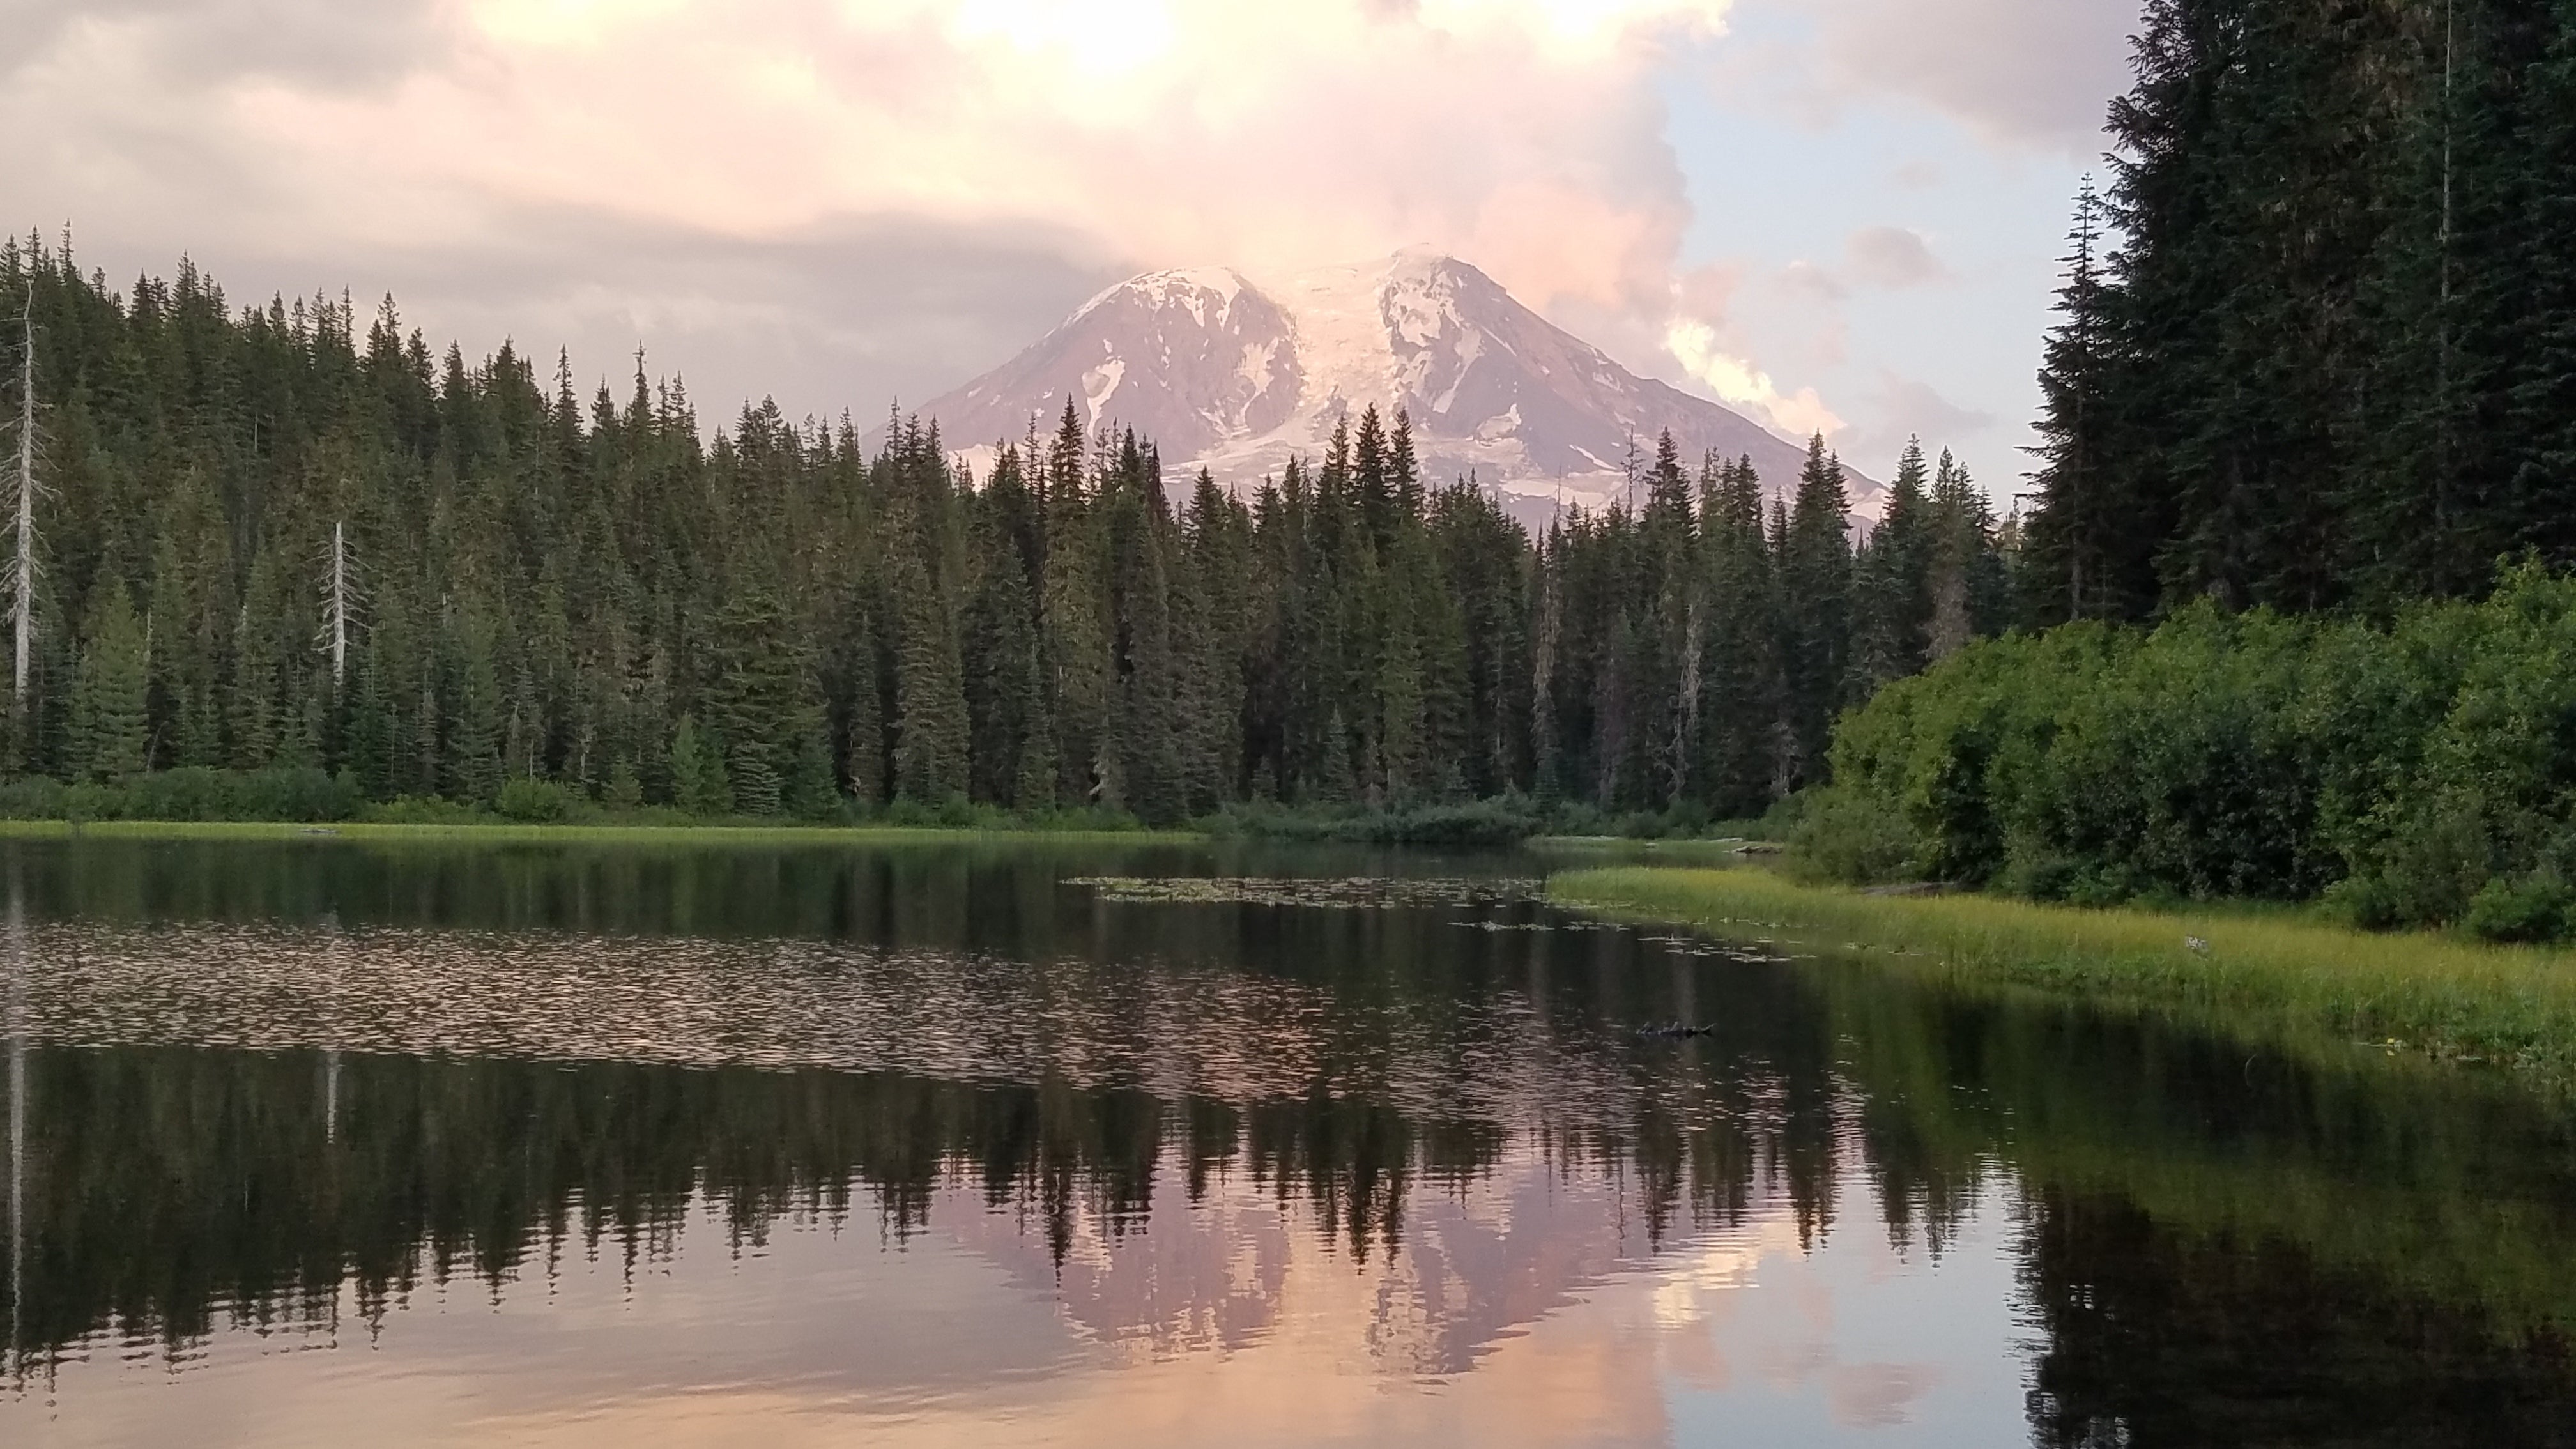 Olallie Lake in the evening